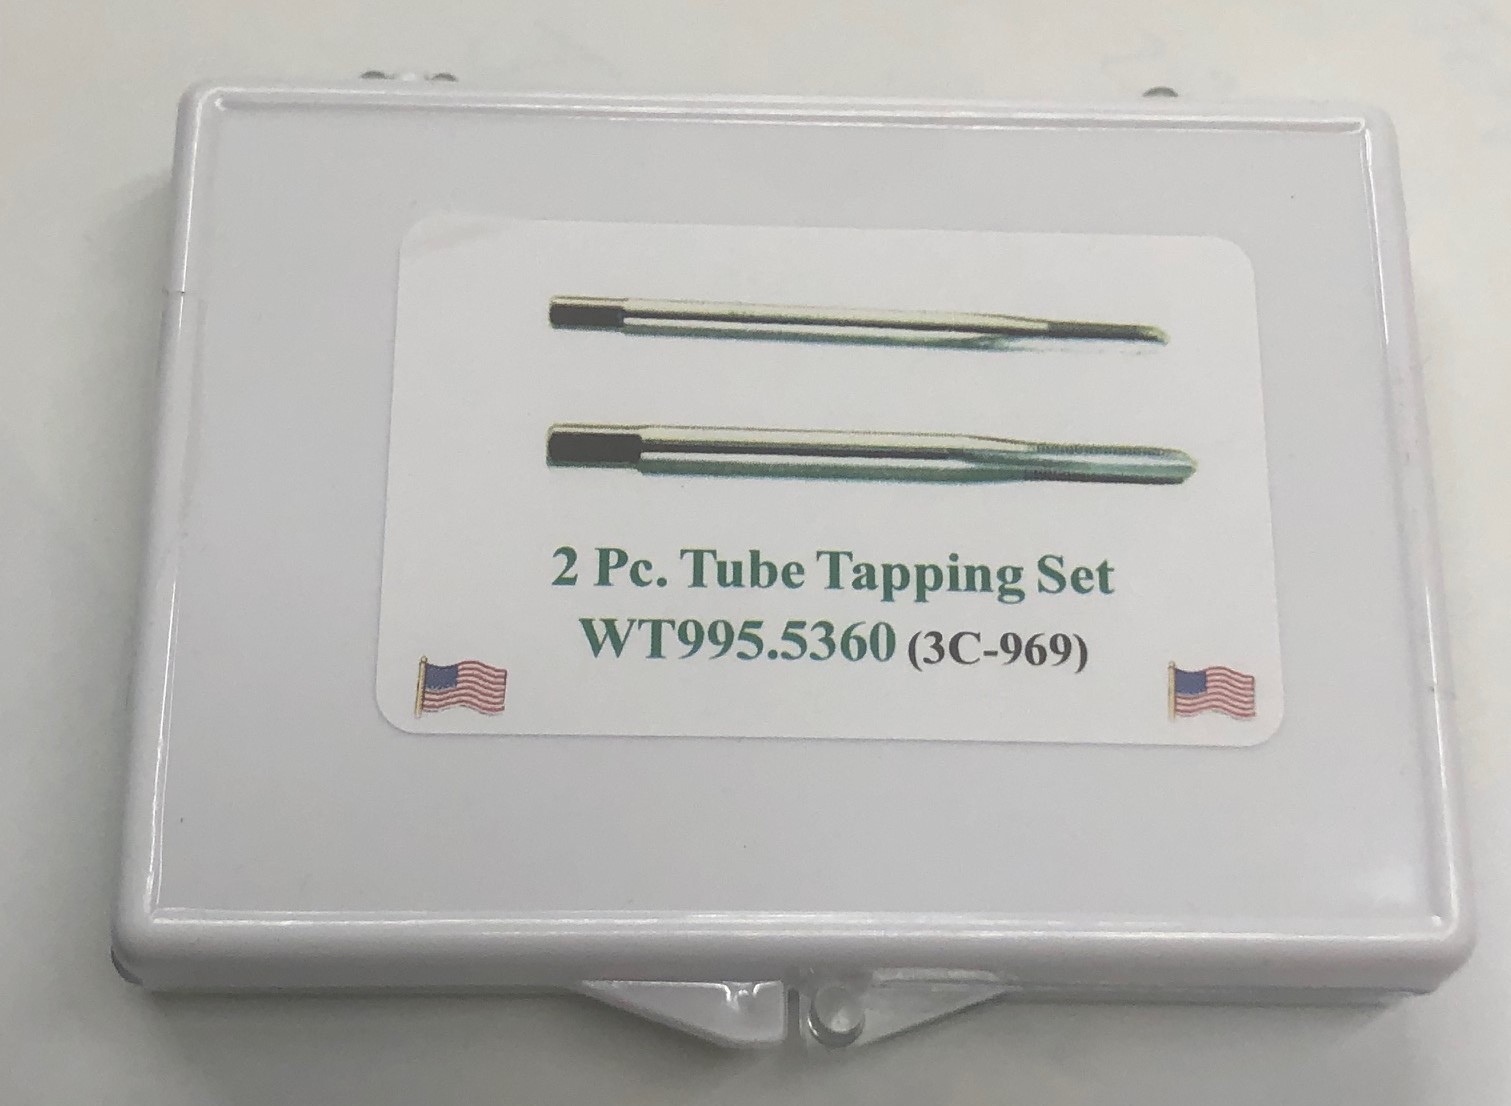 Generic Rolex Case Tube Tap Set – 2 pc. Product Thumbail (View full Size)